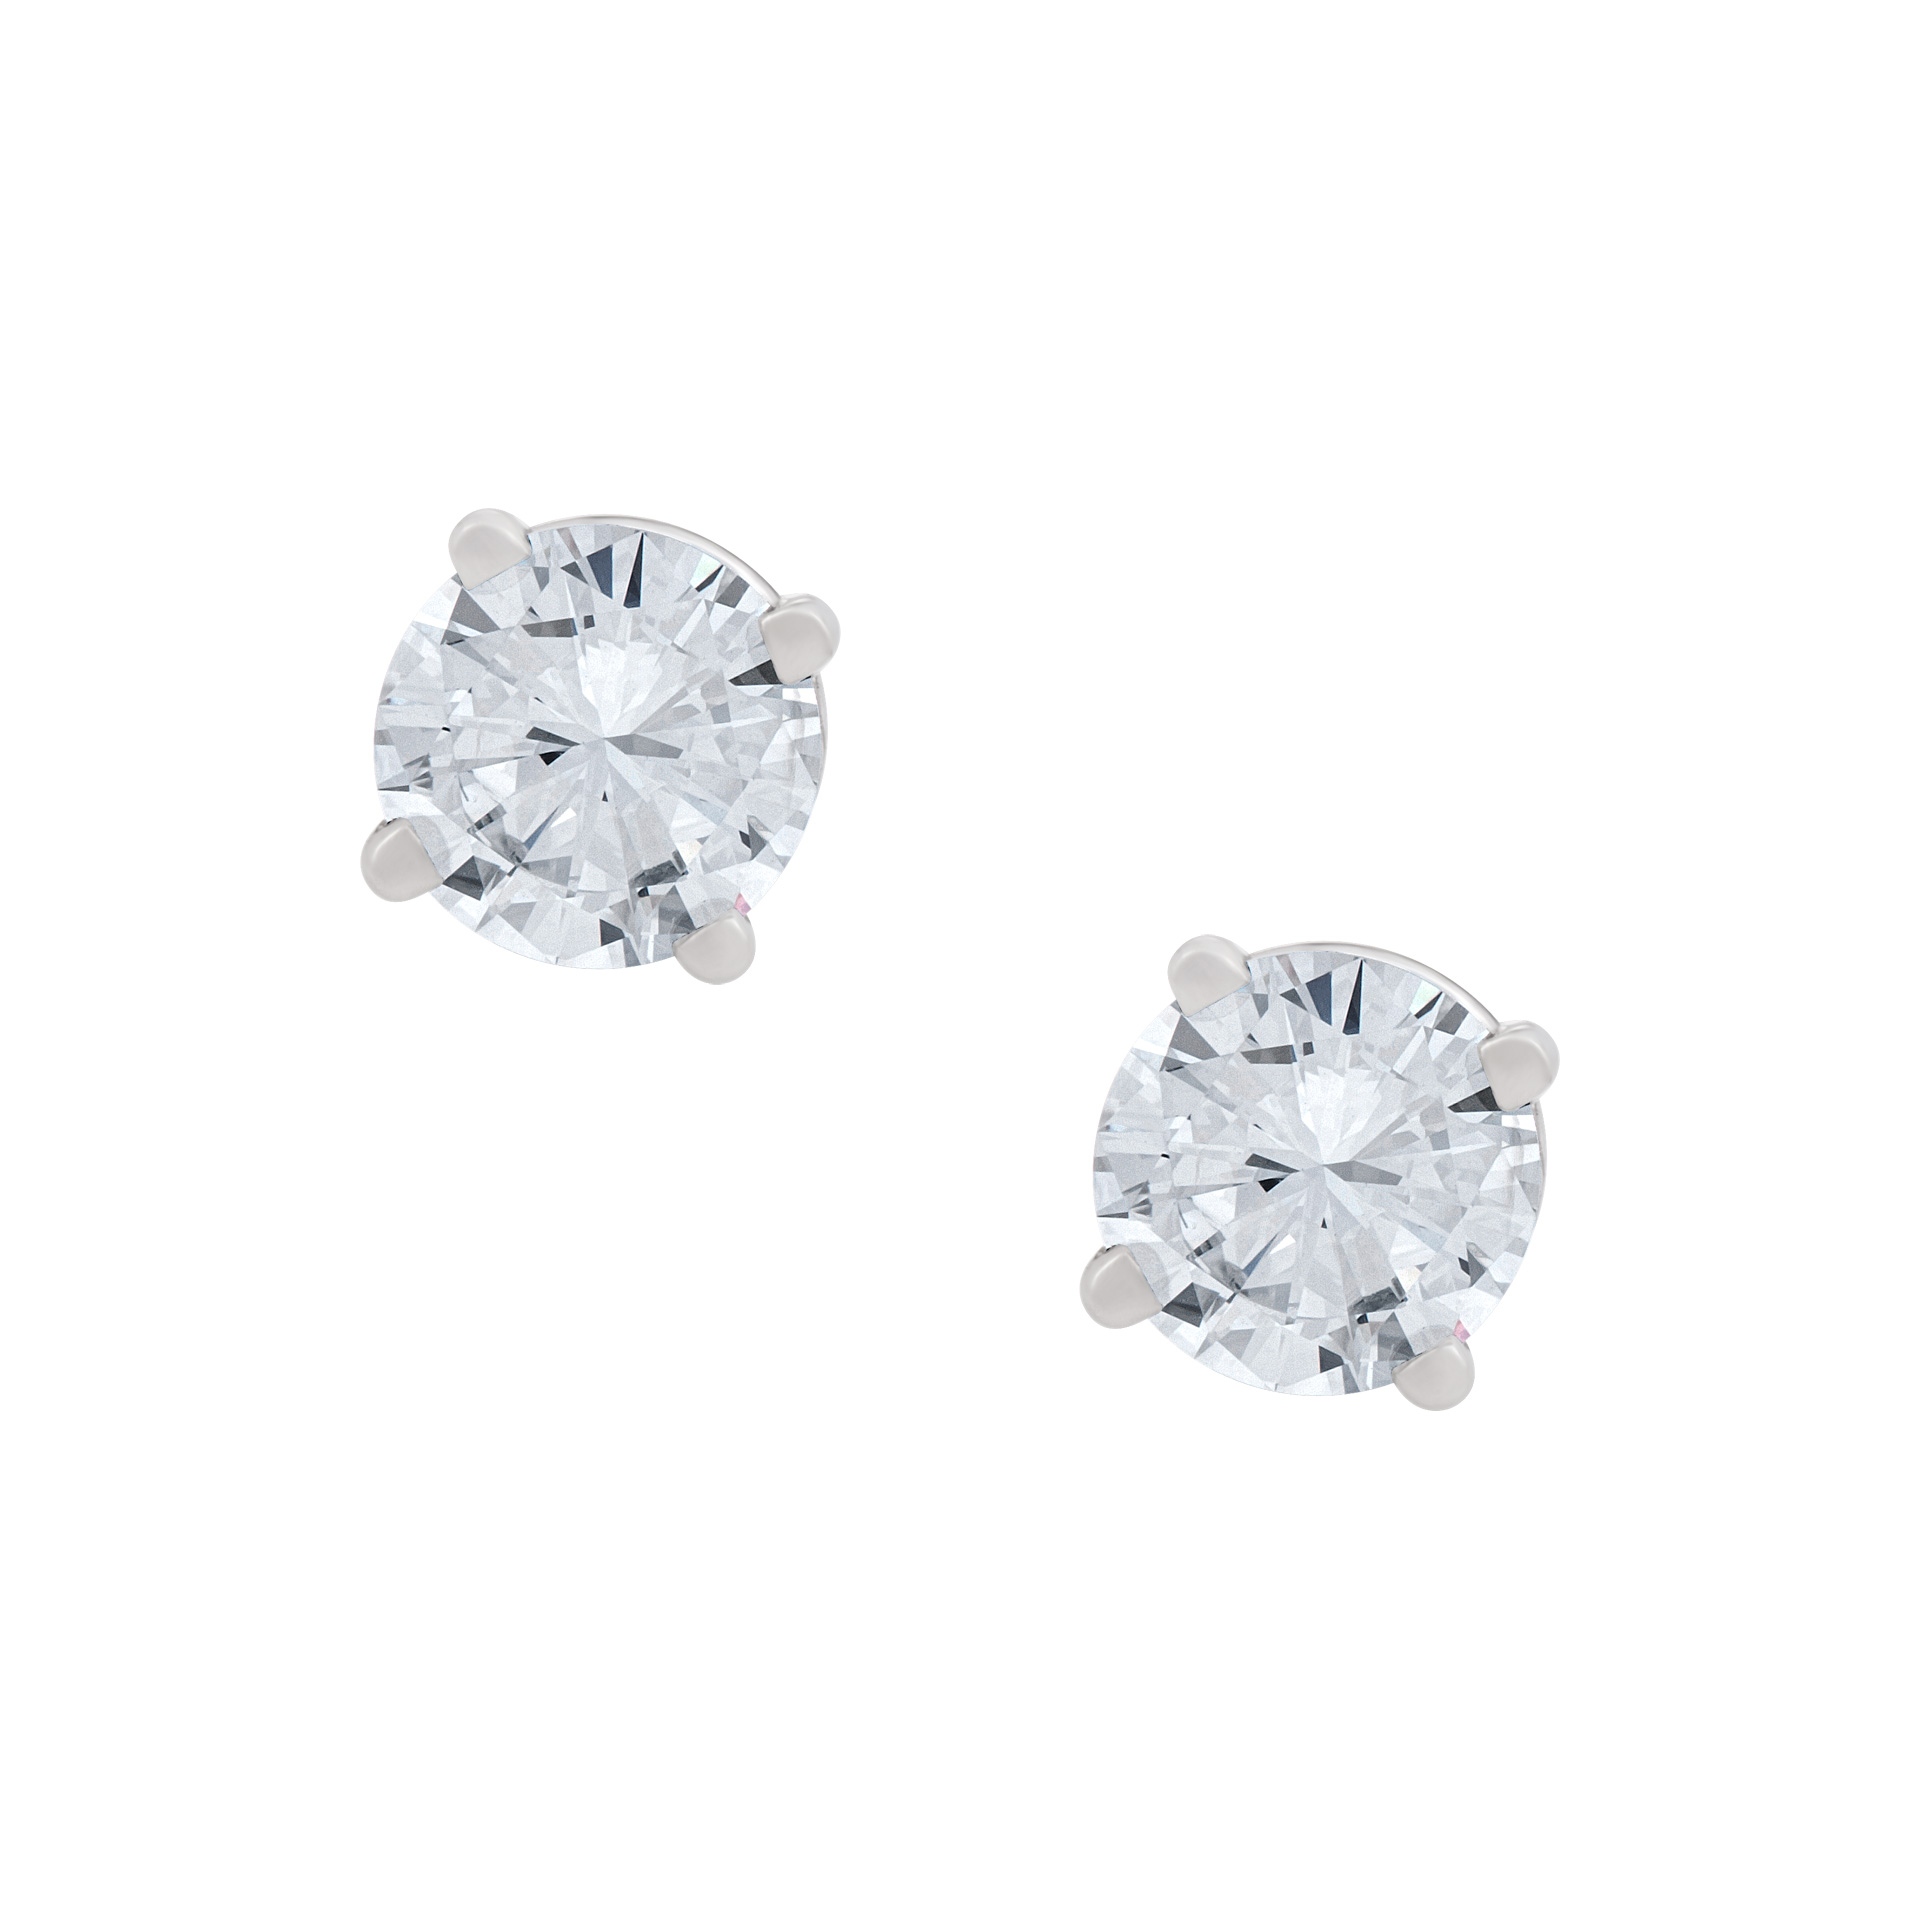 Gia Certified Diamond Studs .83cts G Color I-1 Clarity .82 D Color I-1 Clarity